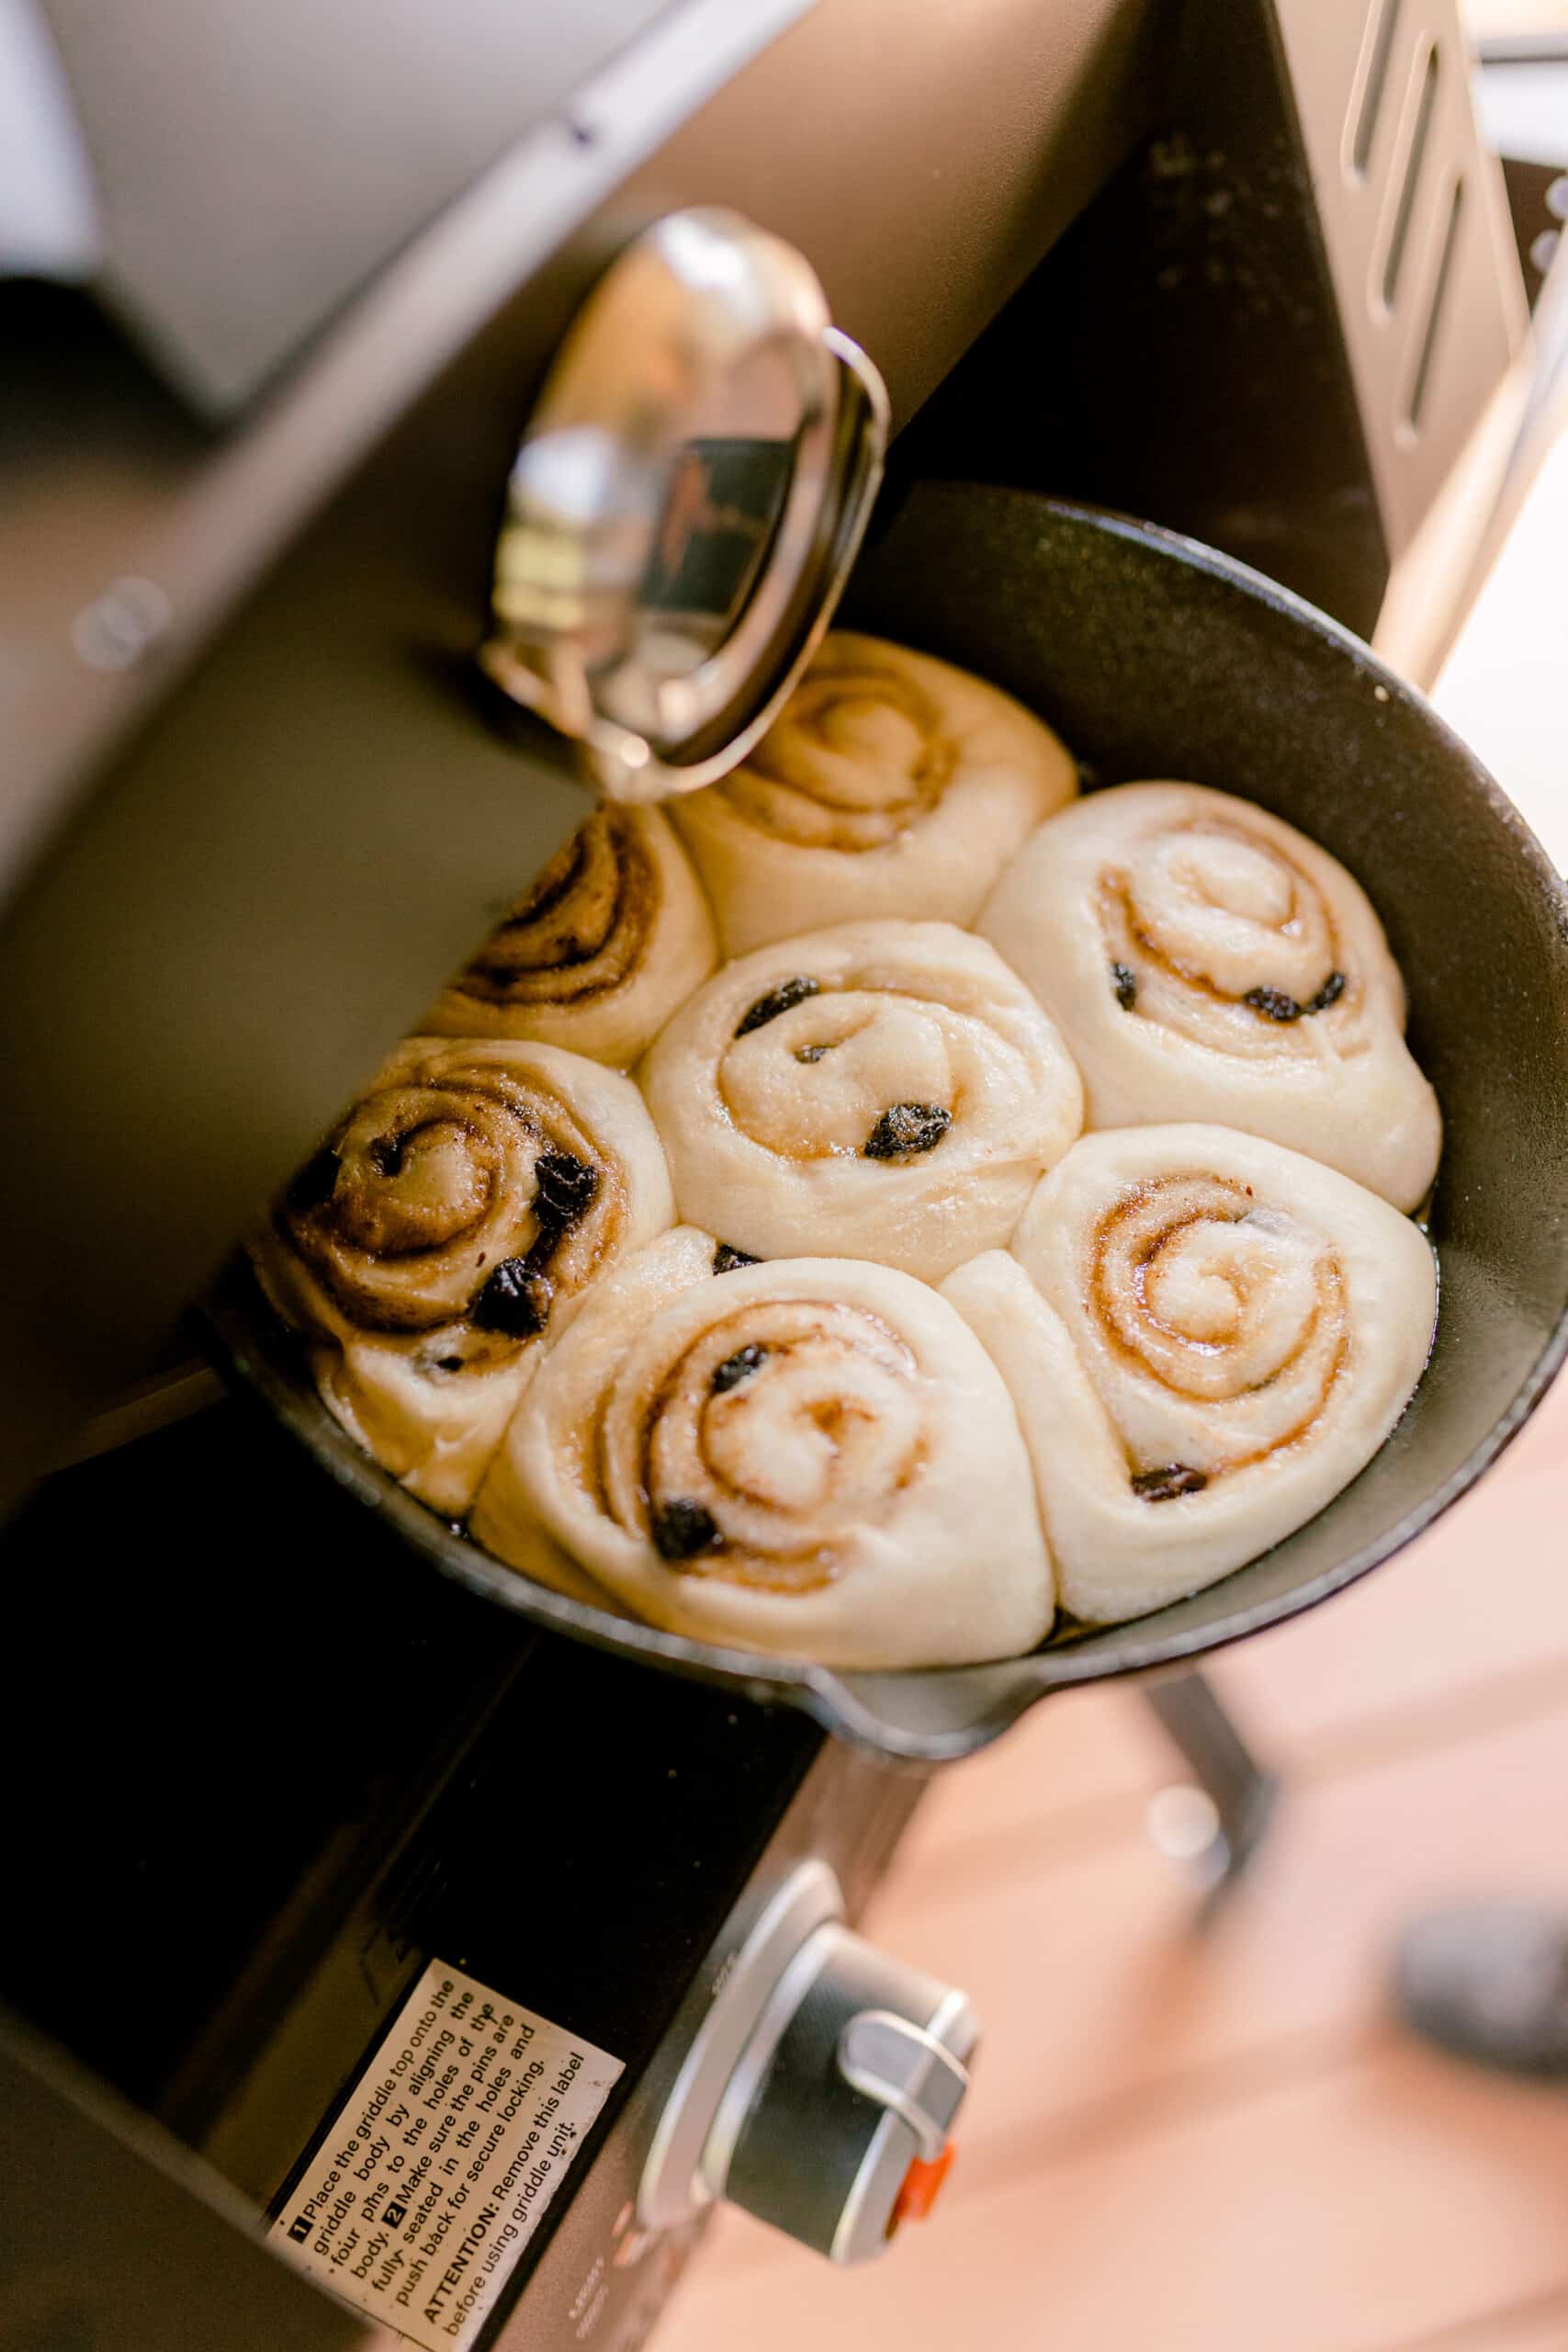 Unbaked cast iron pan of homemade cinnamon rolls being placed into a hot pizza oven.